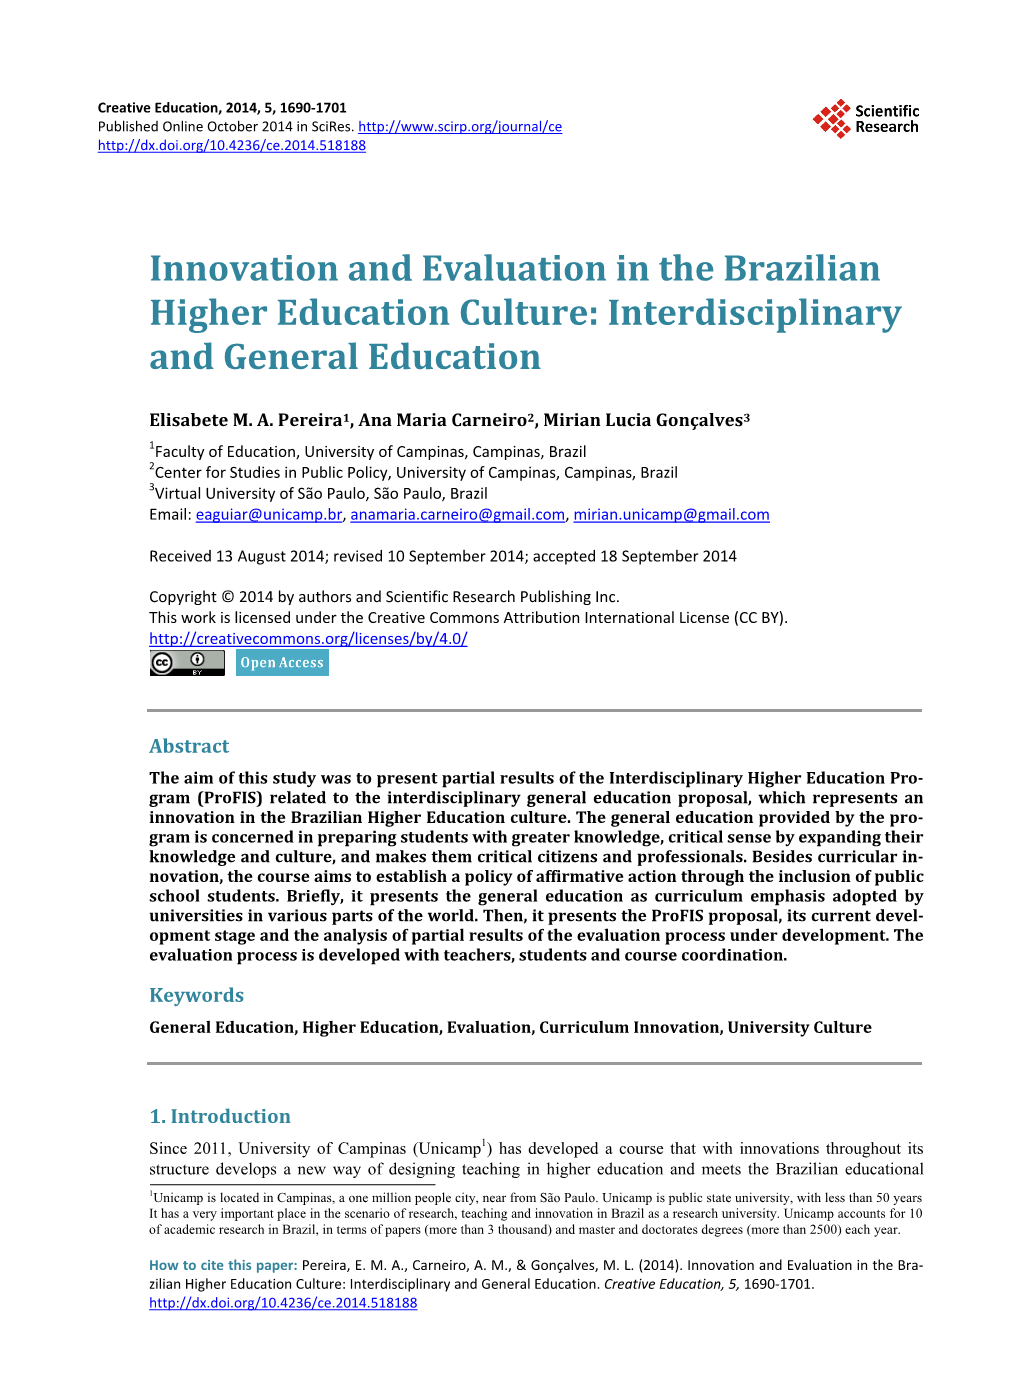 Innovation and Evaluation in the Brazilian Higher Education Culture: Interdisciplinary and General Education